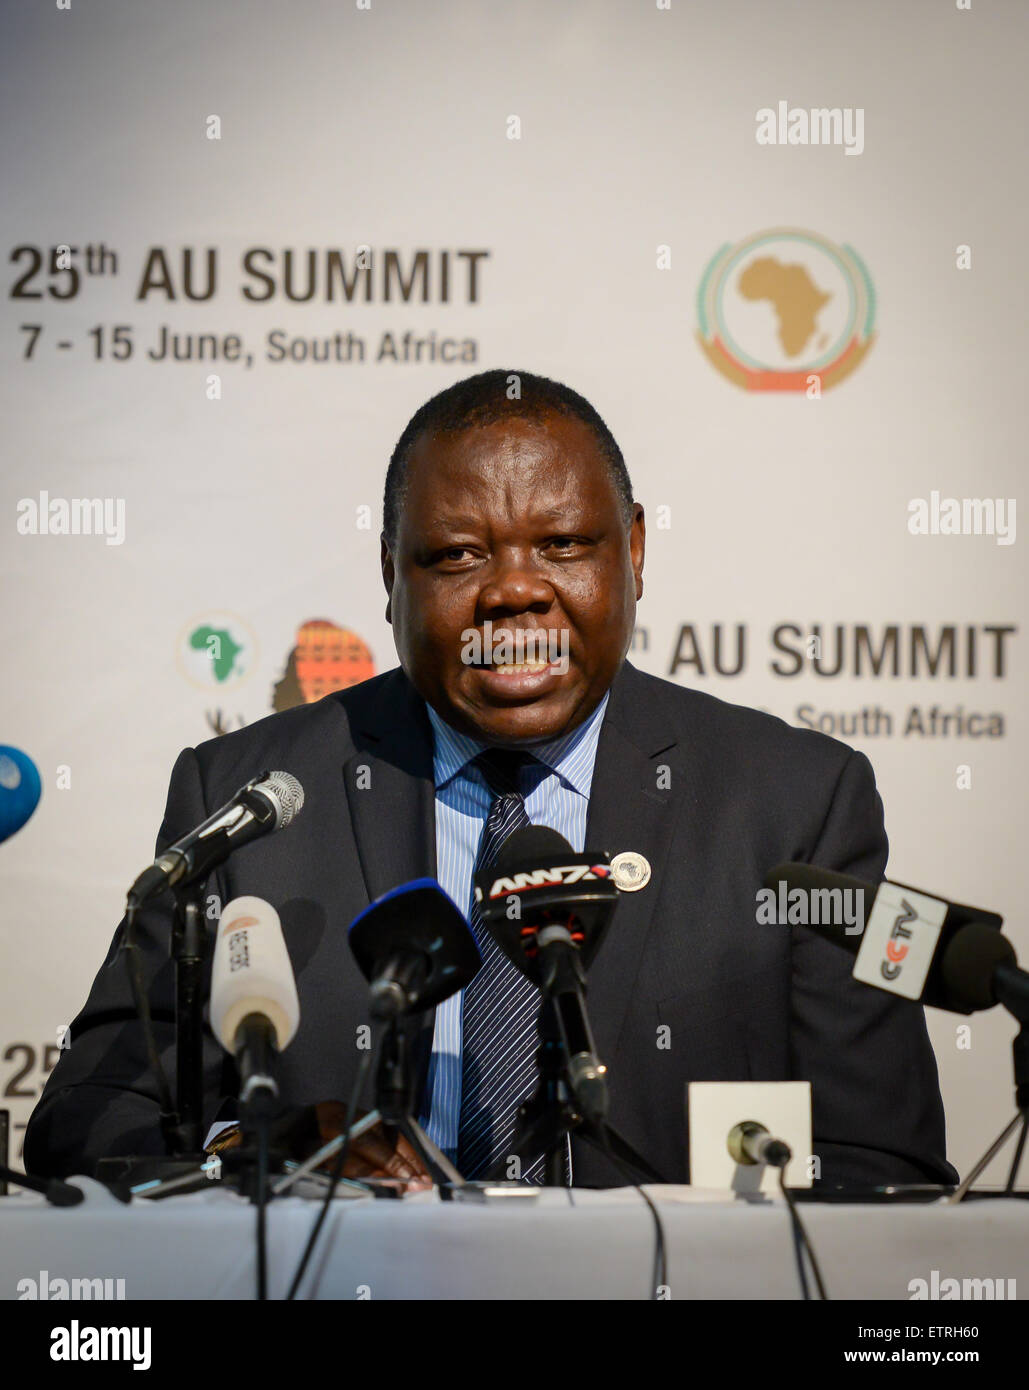 (150615) -- JOHANNESBURG, June 15, 2015 (Xinhua) -- The Presiding officer of the Economic, Social and Cultural Council of the African Union, Joseph Chilengi, addresses a media briefing at Sandton Convention Centre in Johannesburg, South Africa, on June 15, 2015. Joseph Chilengi on Monday condemned International Criminal Court (ICC) for ordering the arrest of Sudanese President Omar Al-Bashir during his visit to South Africa to attend the AU Heads of State summit. (Xinhua/Zhai Jianlan) Stock Photo